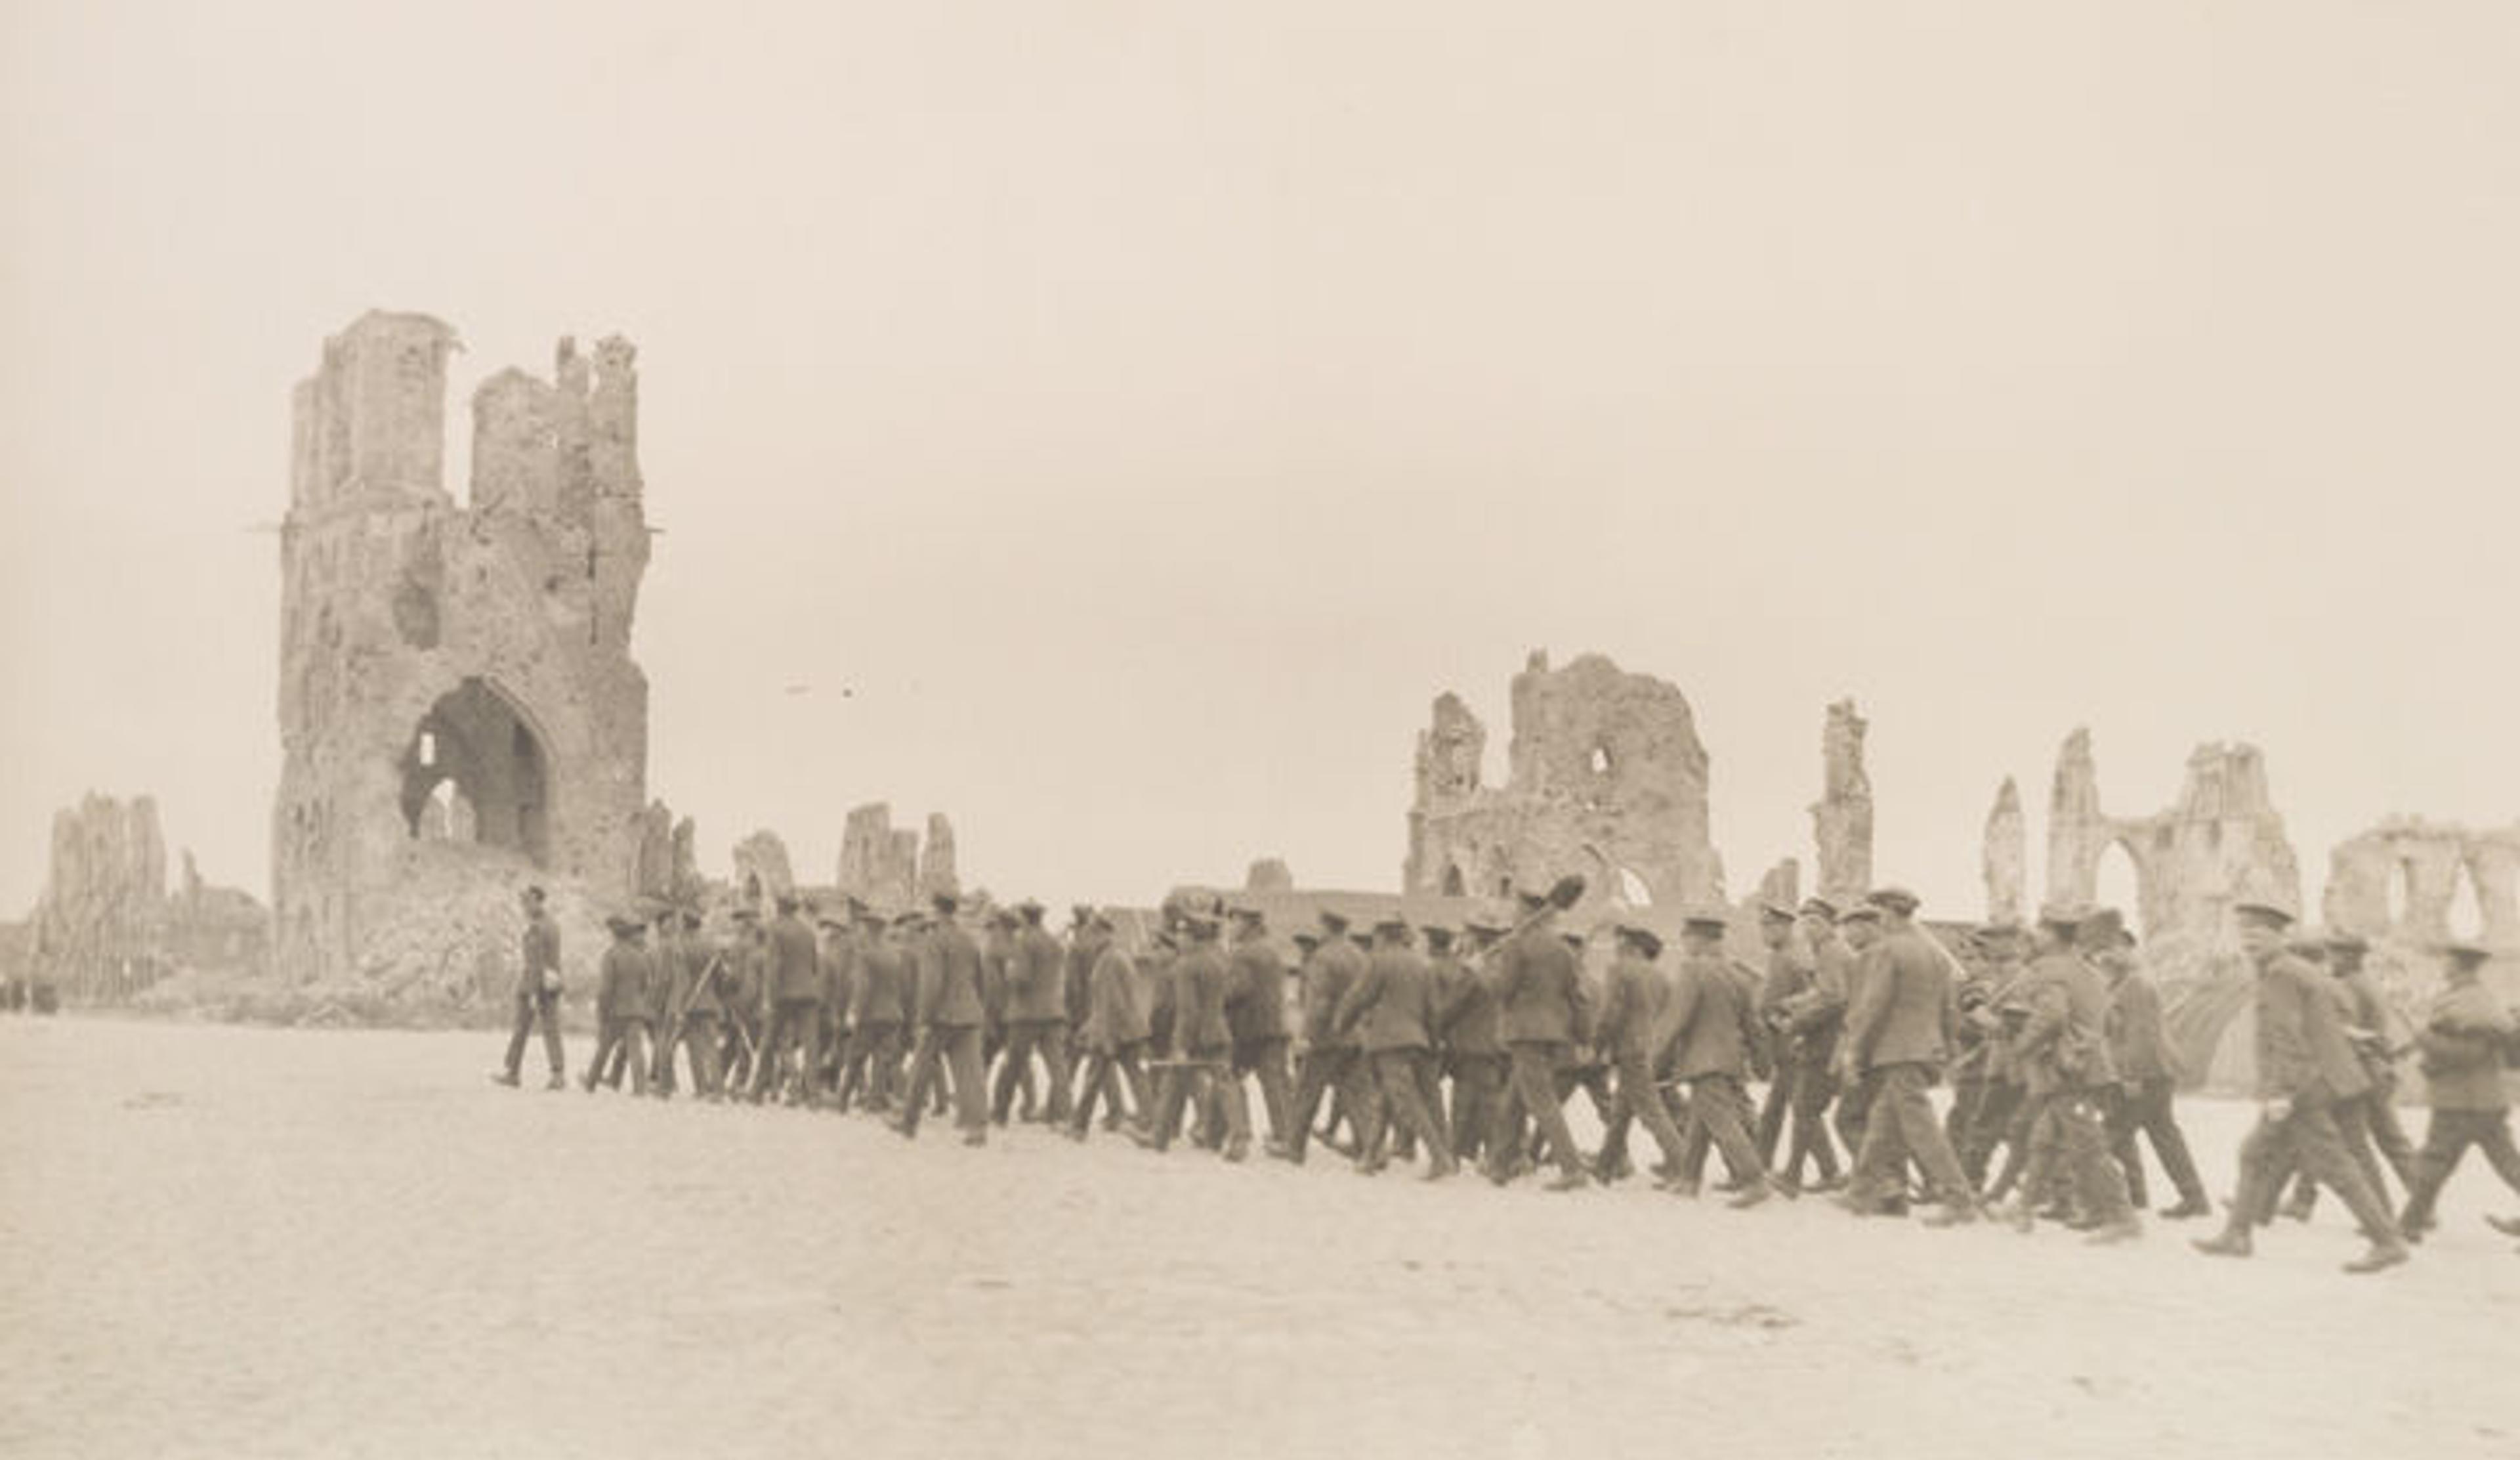 Photo by Margaret Hall showing a group of soldiers marching toward the ruins of a Belgian cathedral